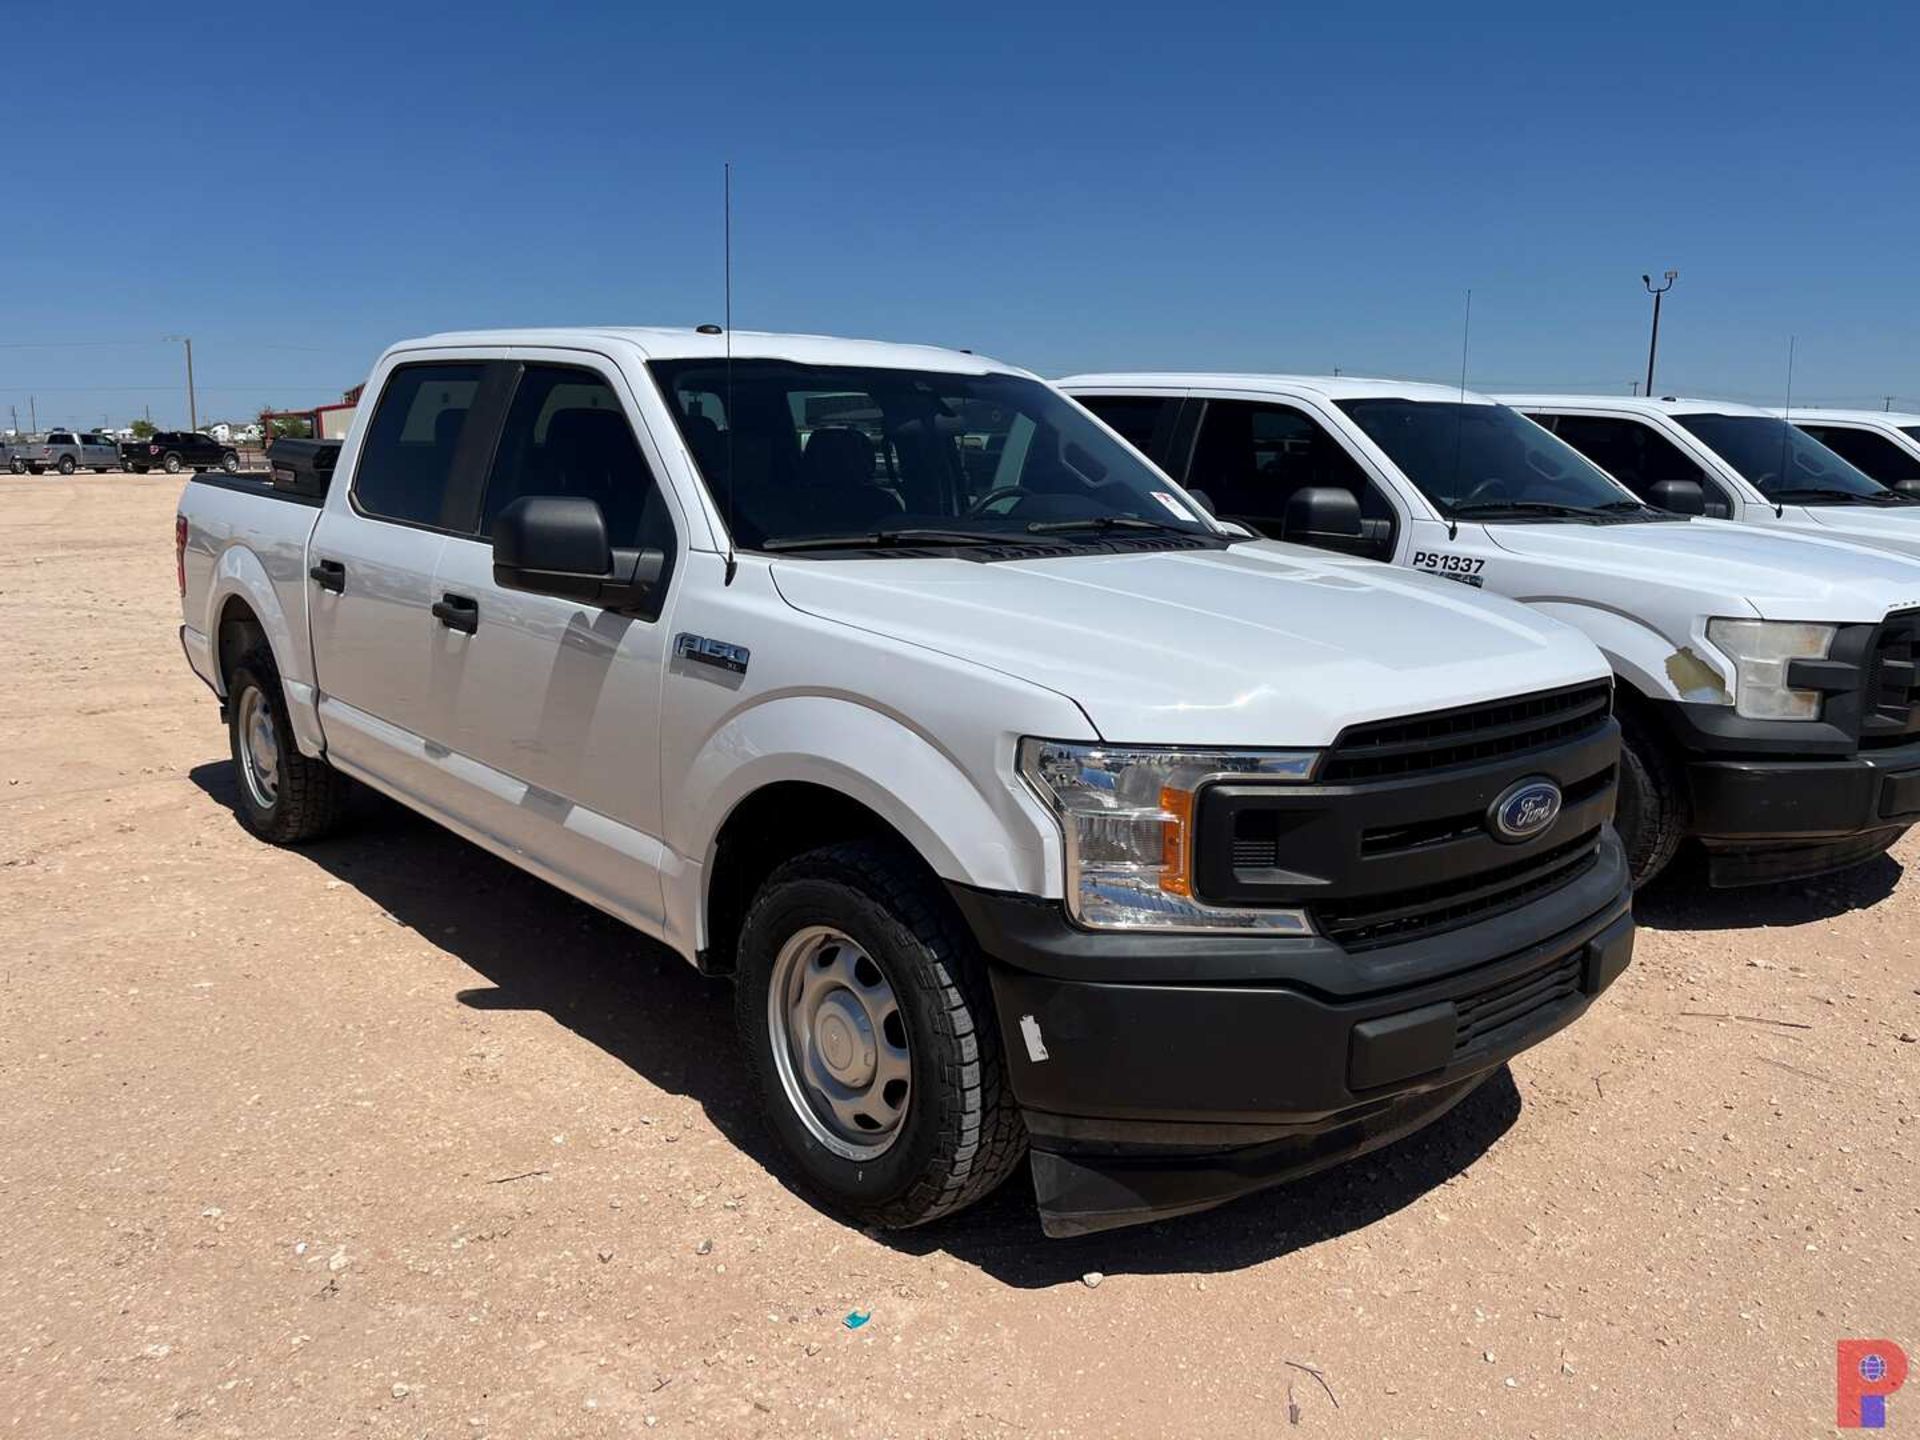 2019 FORD F-150 CREW CAB PICKUP TRUCK - Image 3 of 12